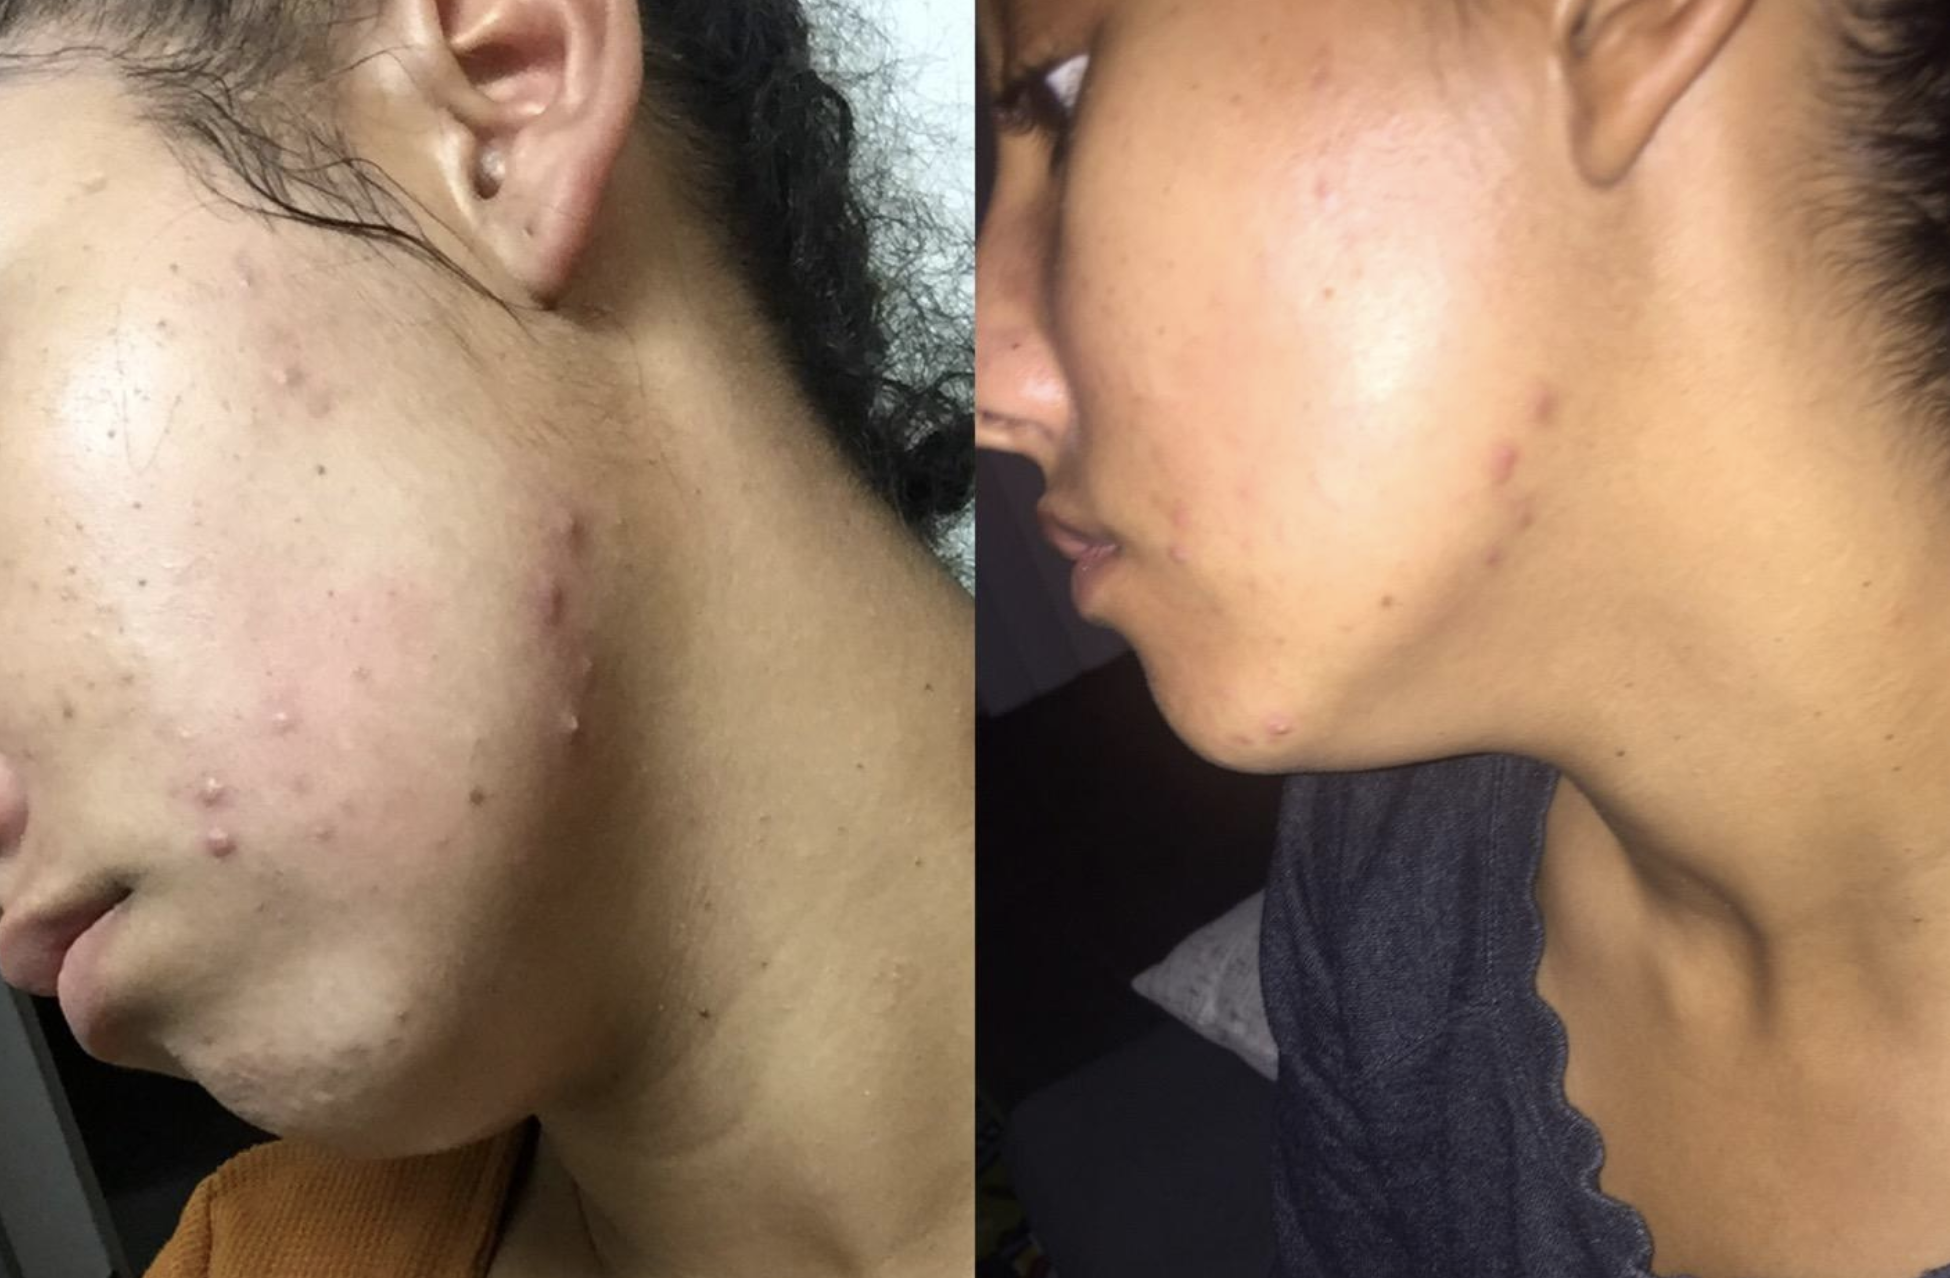 reviewer on left with visible acne on cheeks and on right, same reviewer with visibly less acne